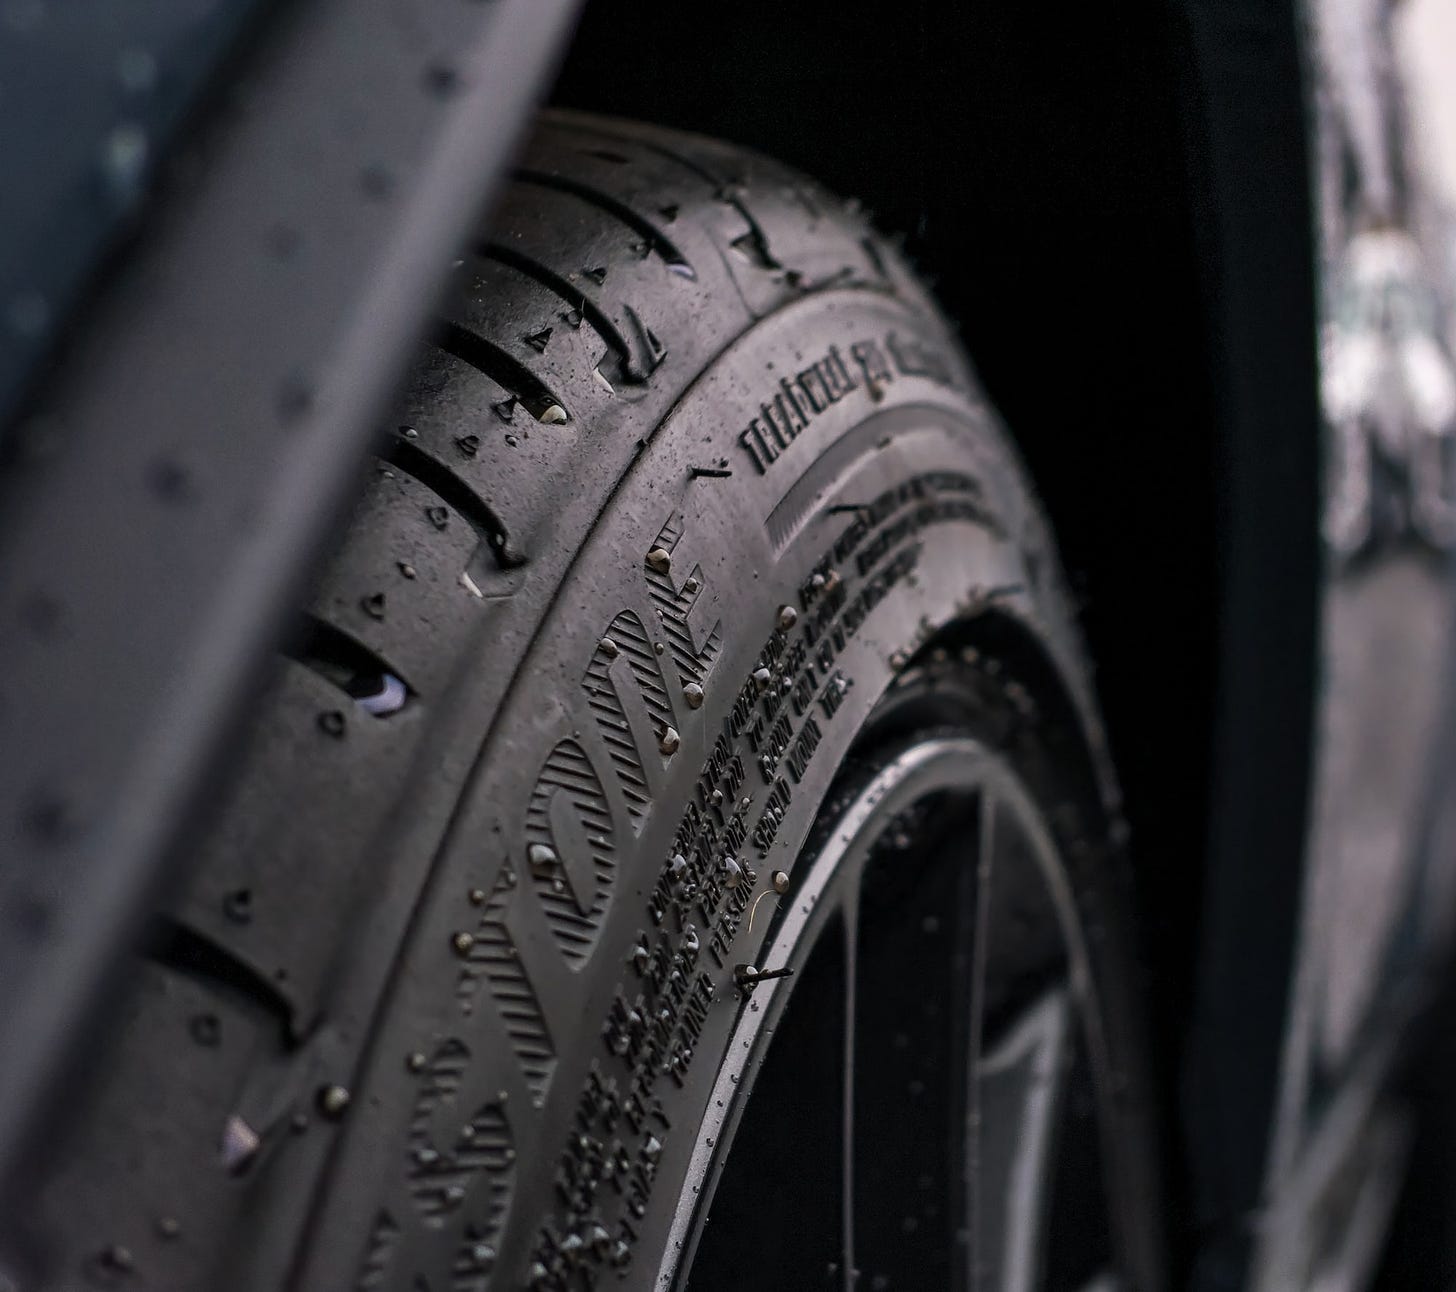 A michelin tire close up. The sealant in tubeless tyres immediately kicks in to seal a puncture, preventing pressure loss.